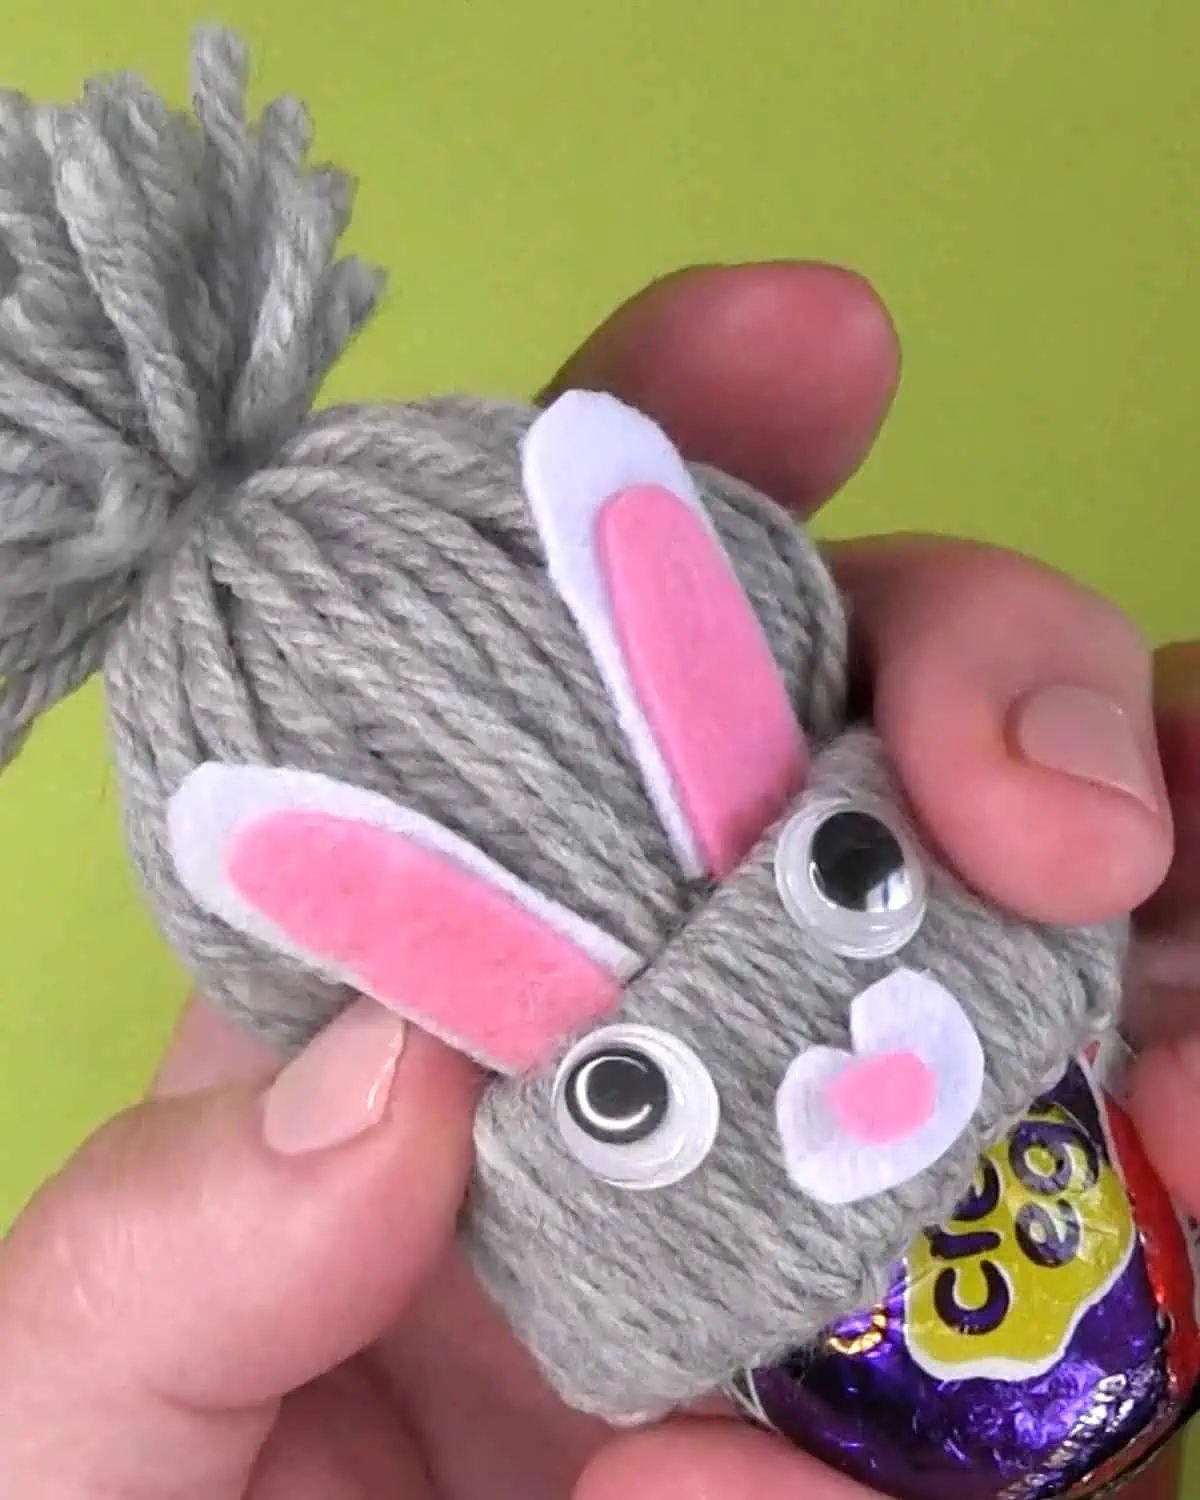 Hands inserting a Cadbury Creme Egg into a Yarn Craft Bunny Cover.